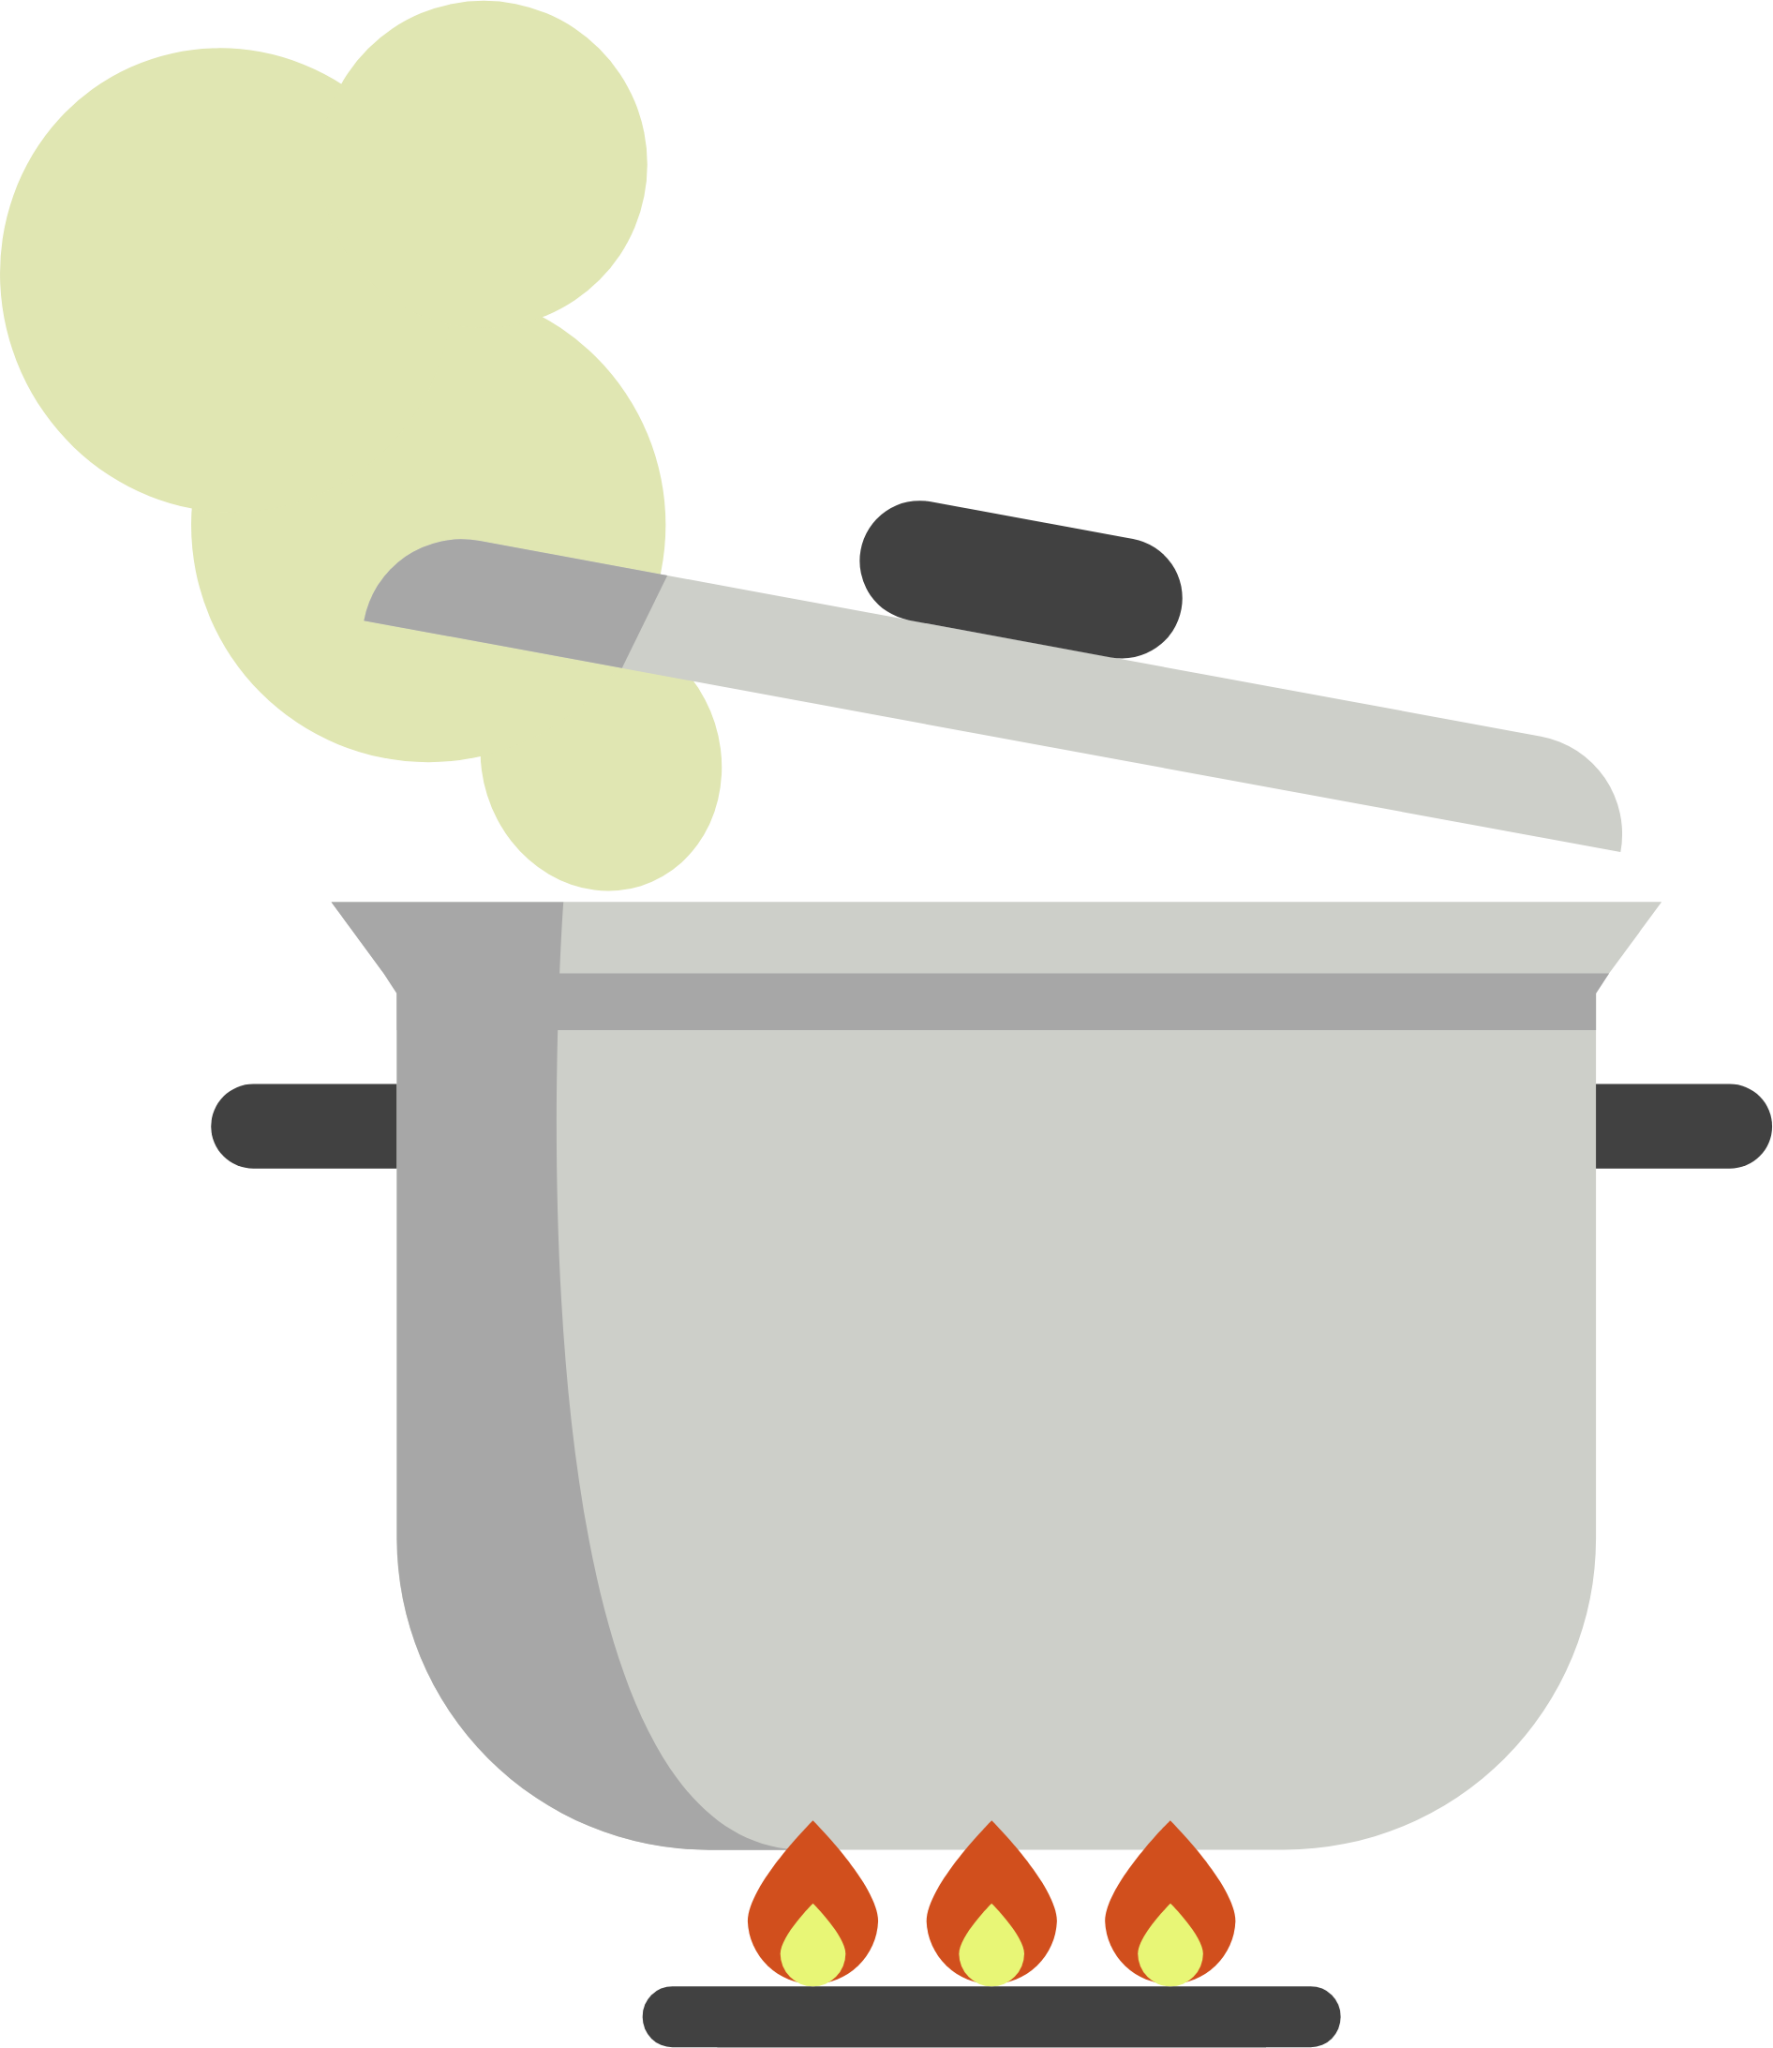 boil water clipart